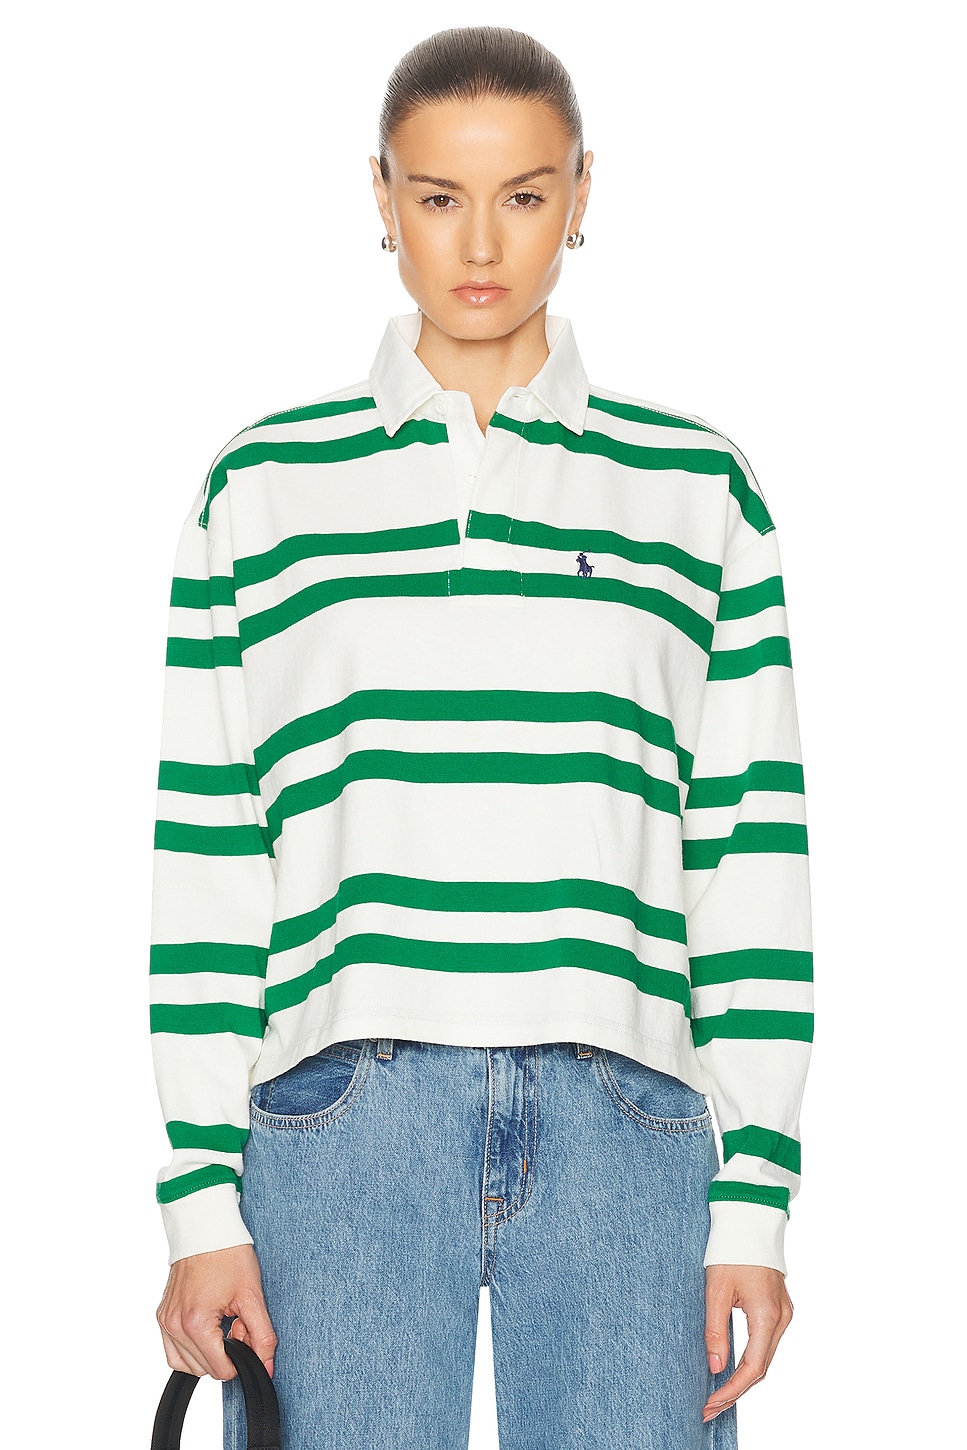 Image 1 of Polo Ralph Lauren Long Sleeve Rugby Top in Deckwash White & Hillside Green